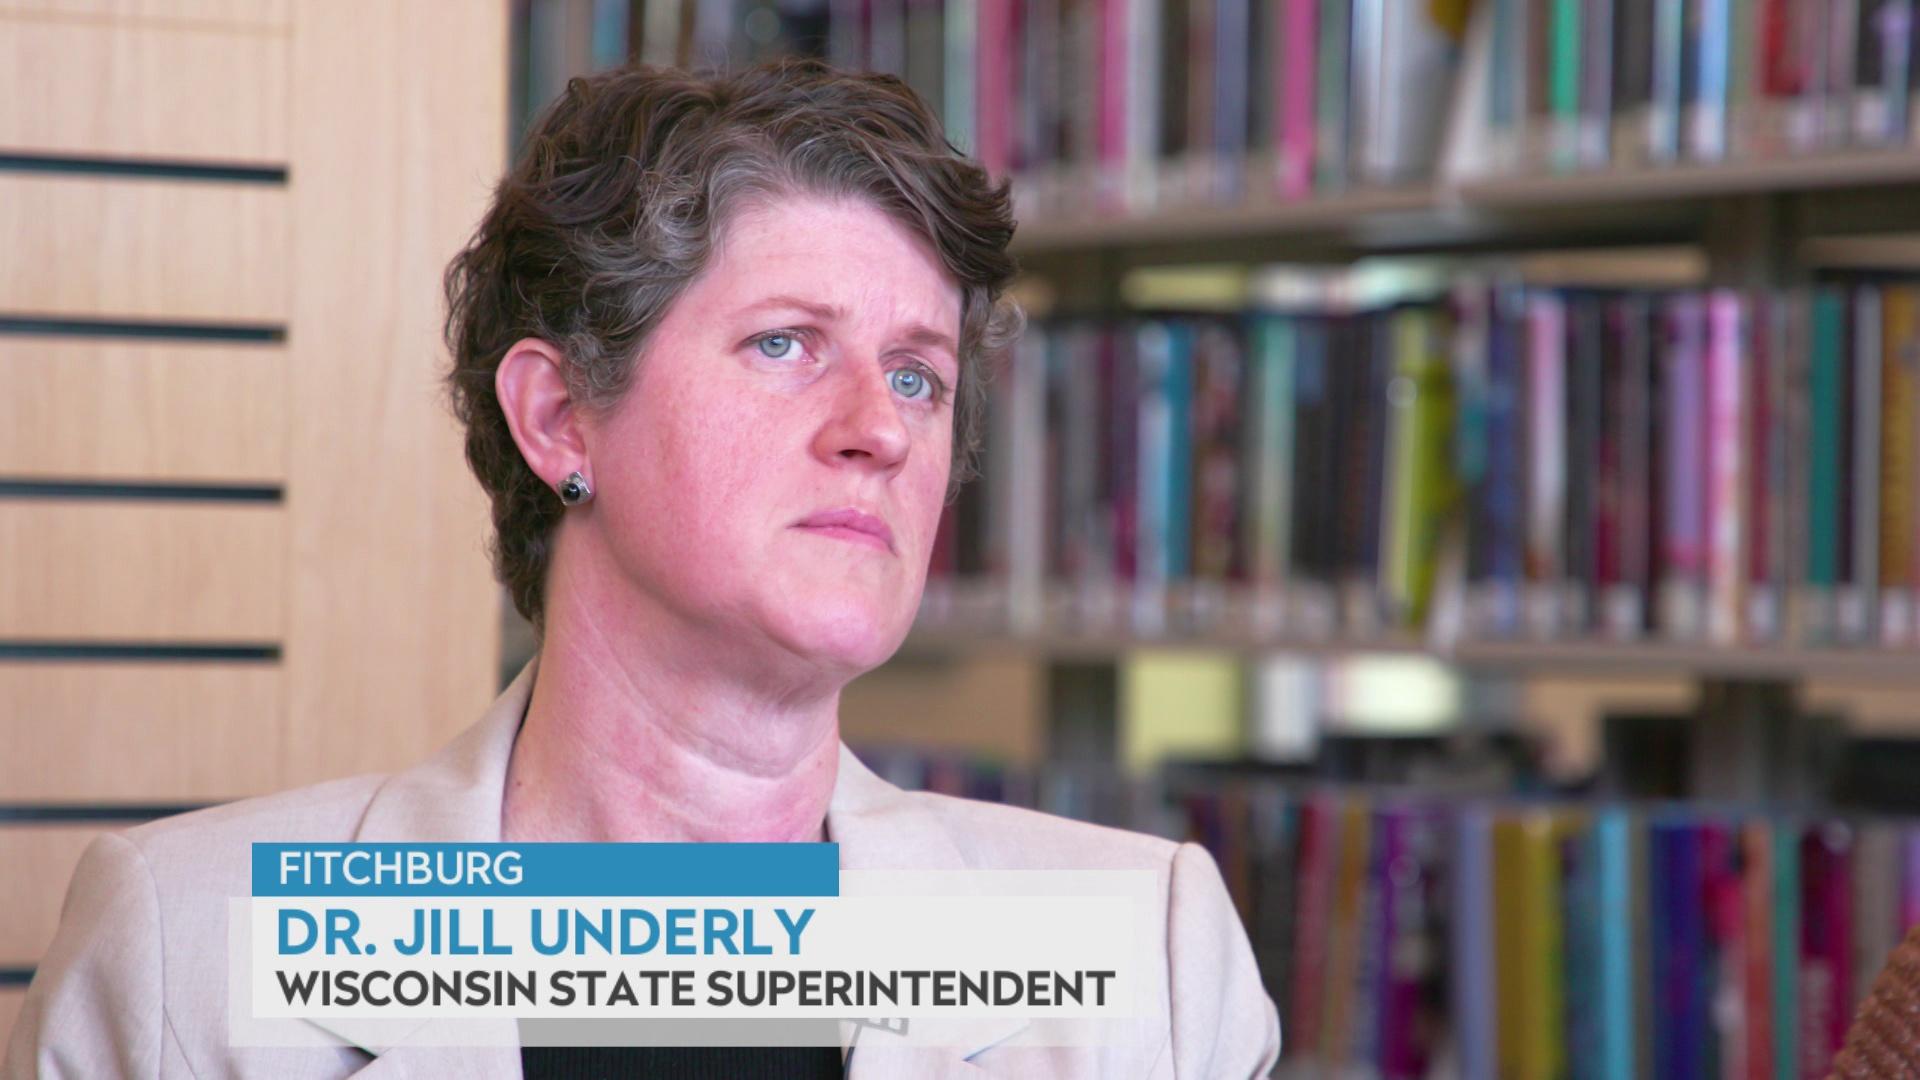 Superintendent Jill Underly on book challenges in Wisconsin